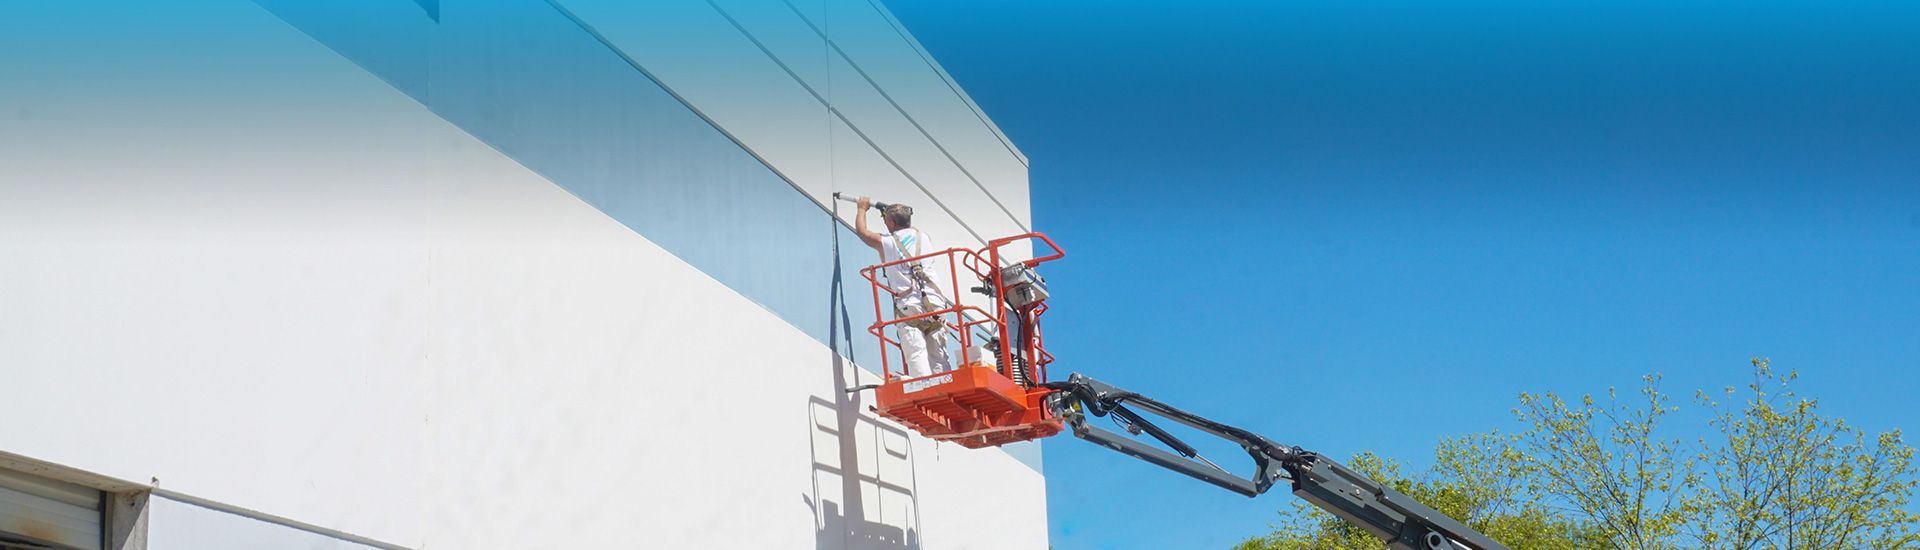 painter caulking a commercial building expansion joint